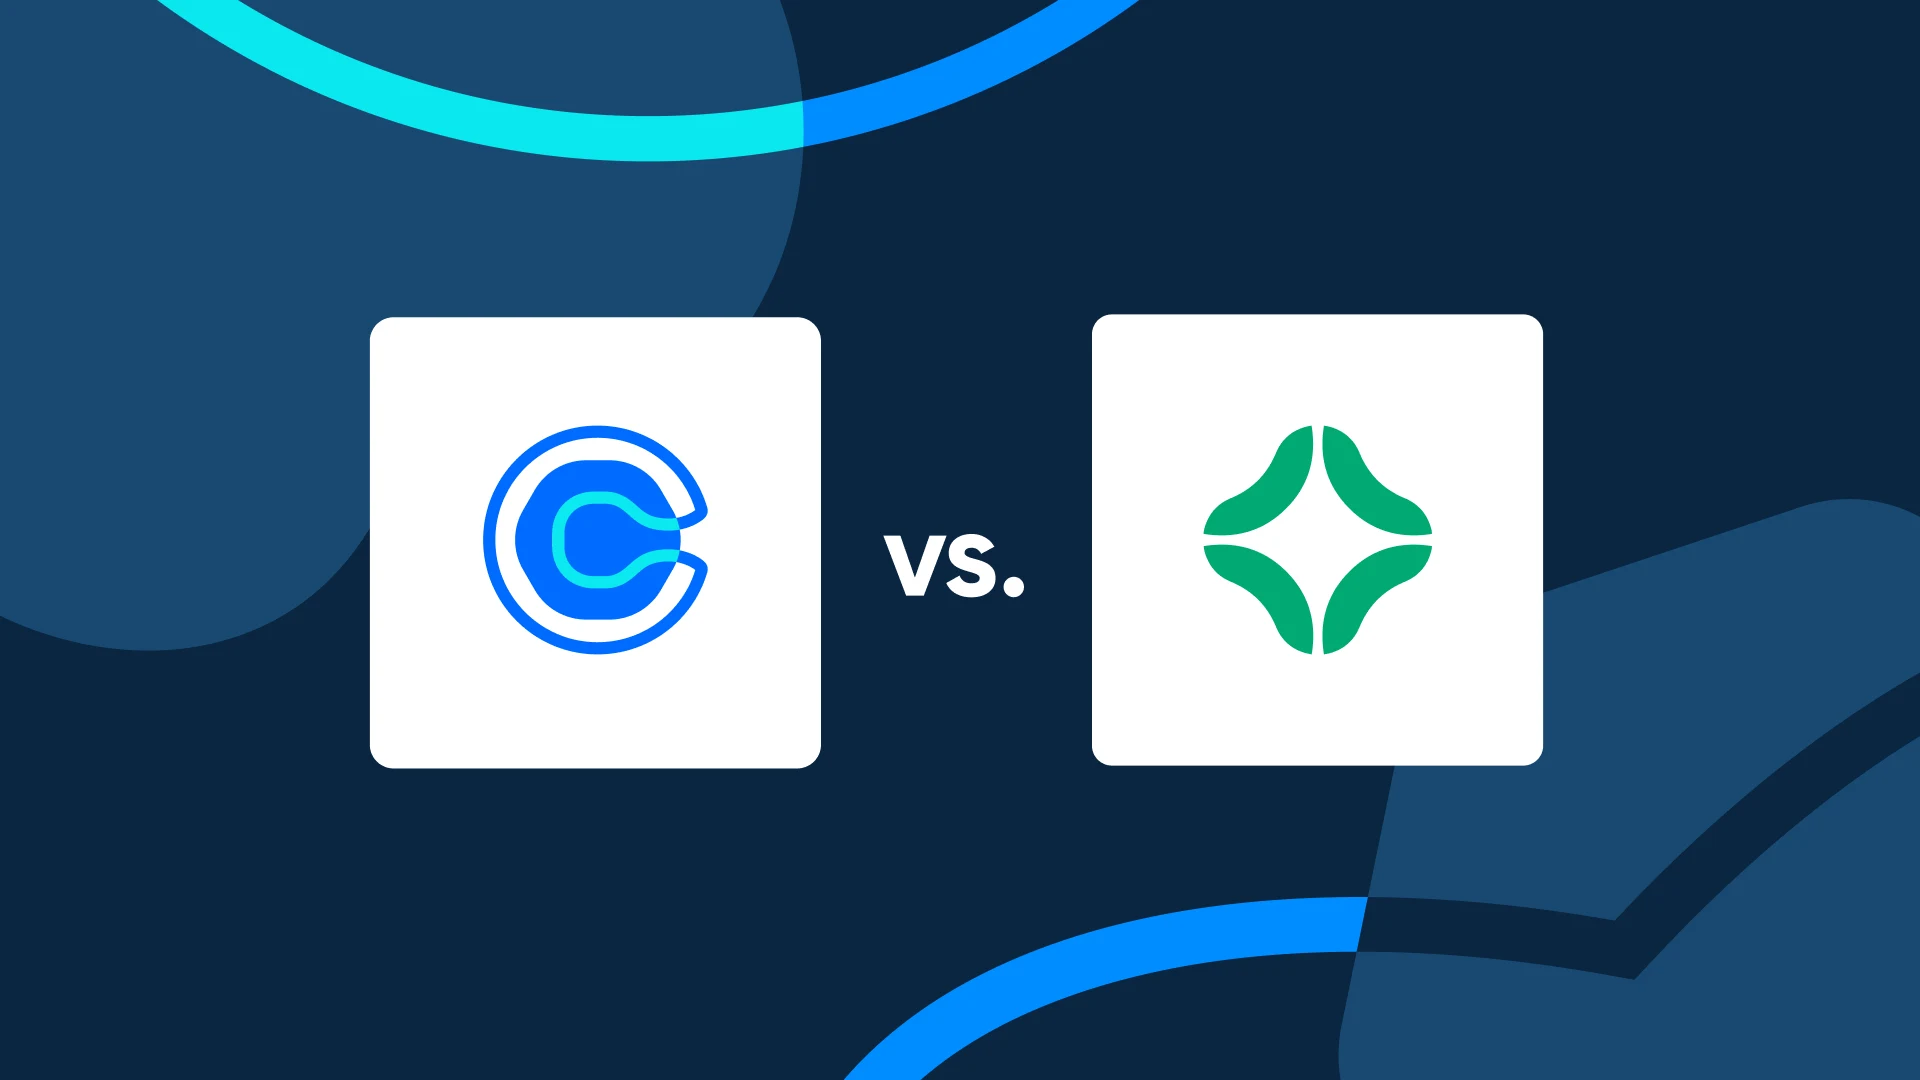 [Blog Hero] Calendly vs Clockwise: Know the key differences